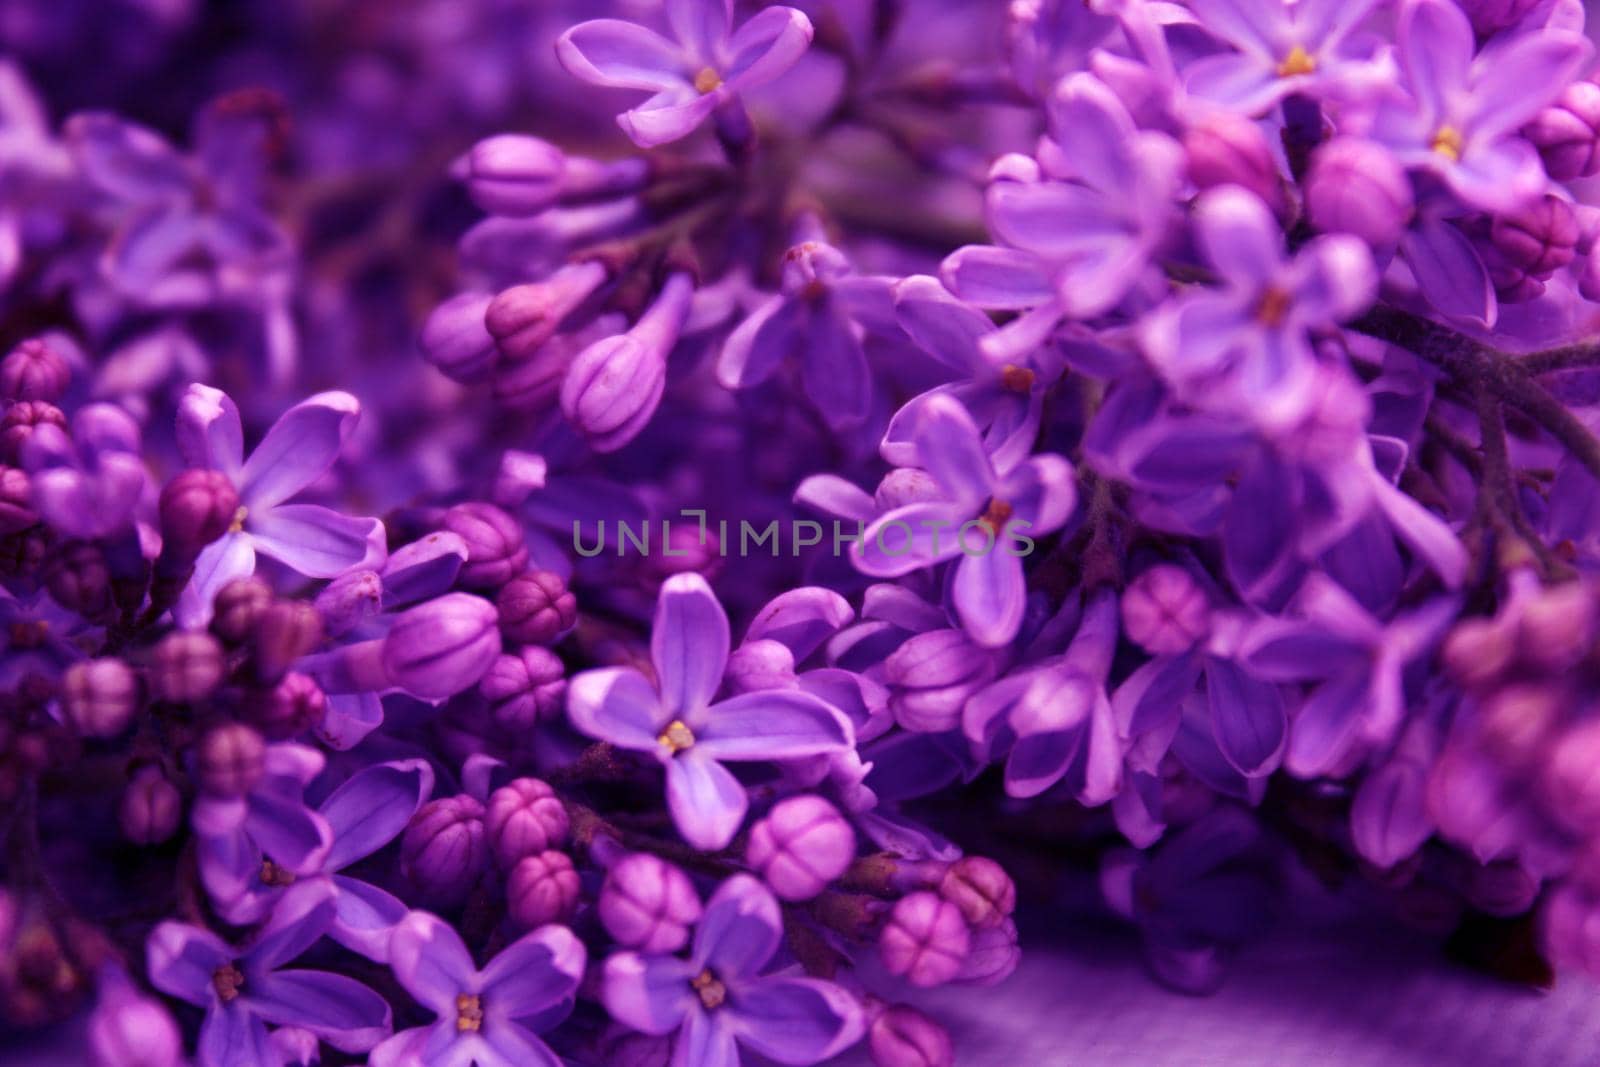 Lilac flowers in neon light. by IronG96